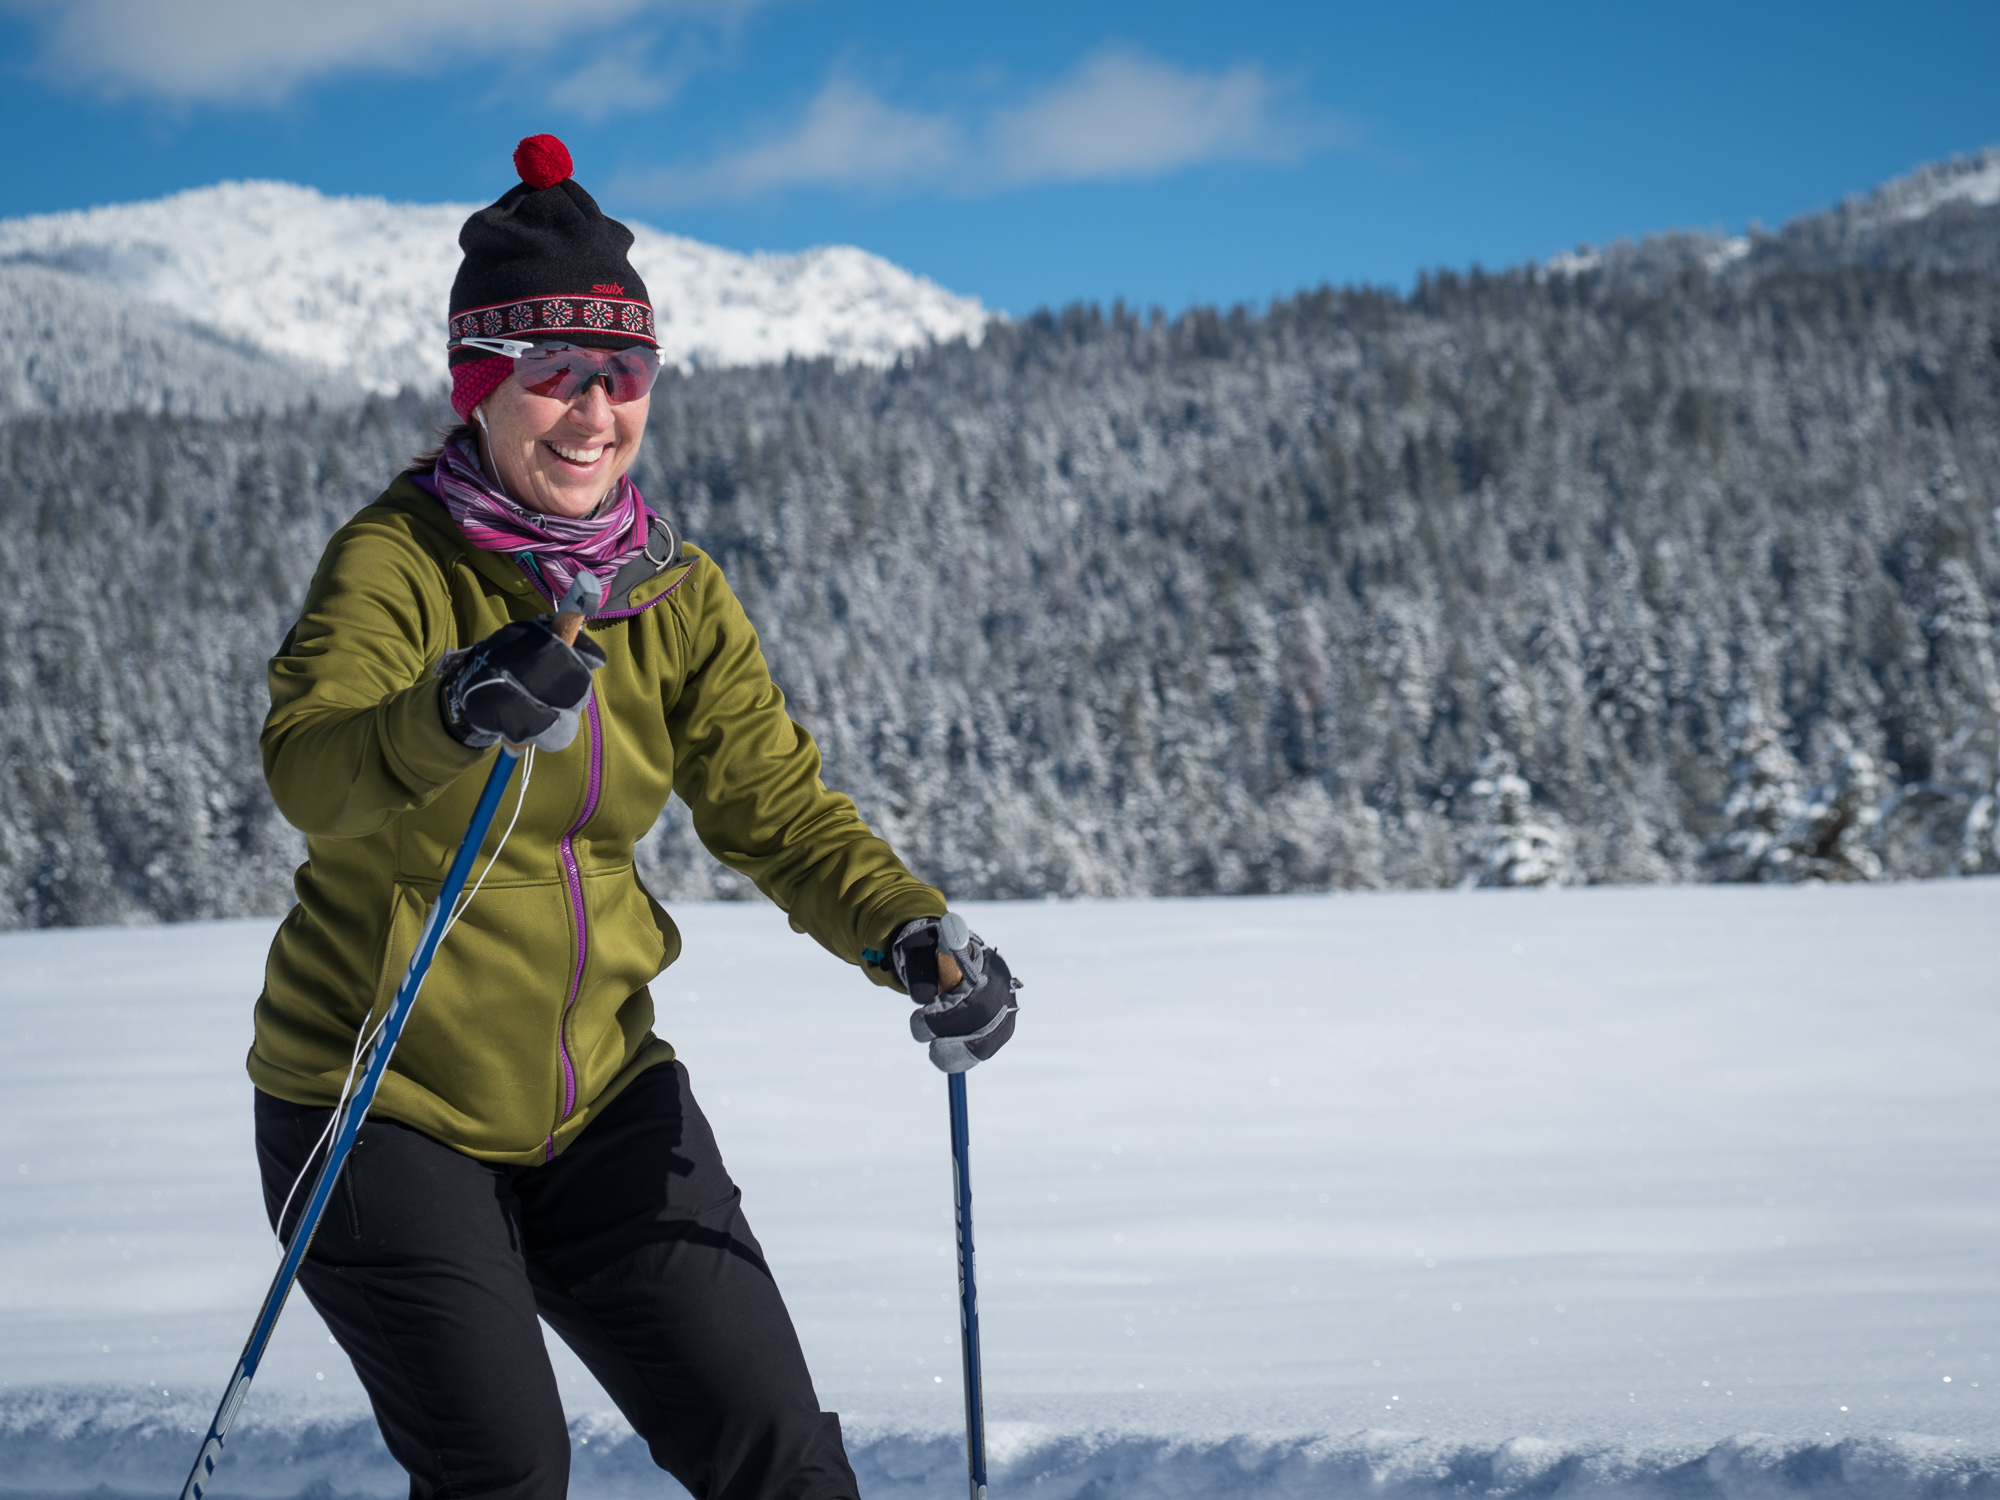 Skate Skiing on the groomed trails at Jug Mountain Ranch in McCall, Idaho